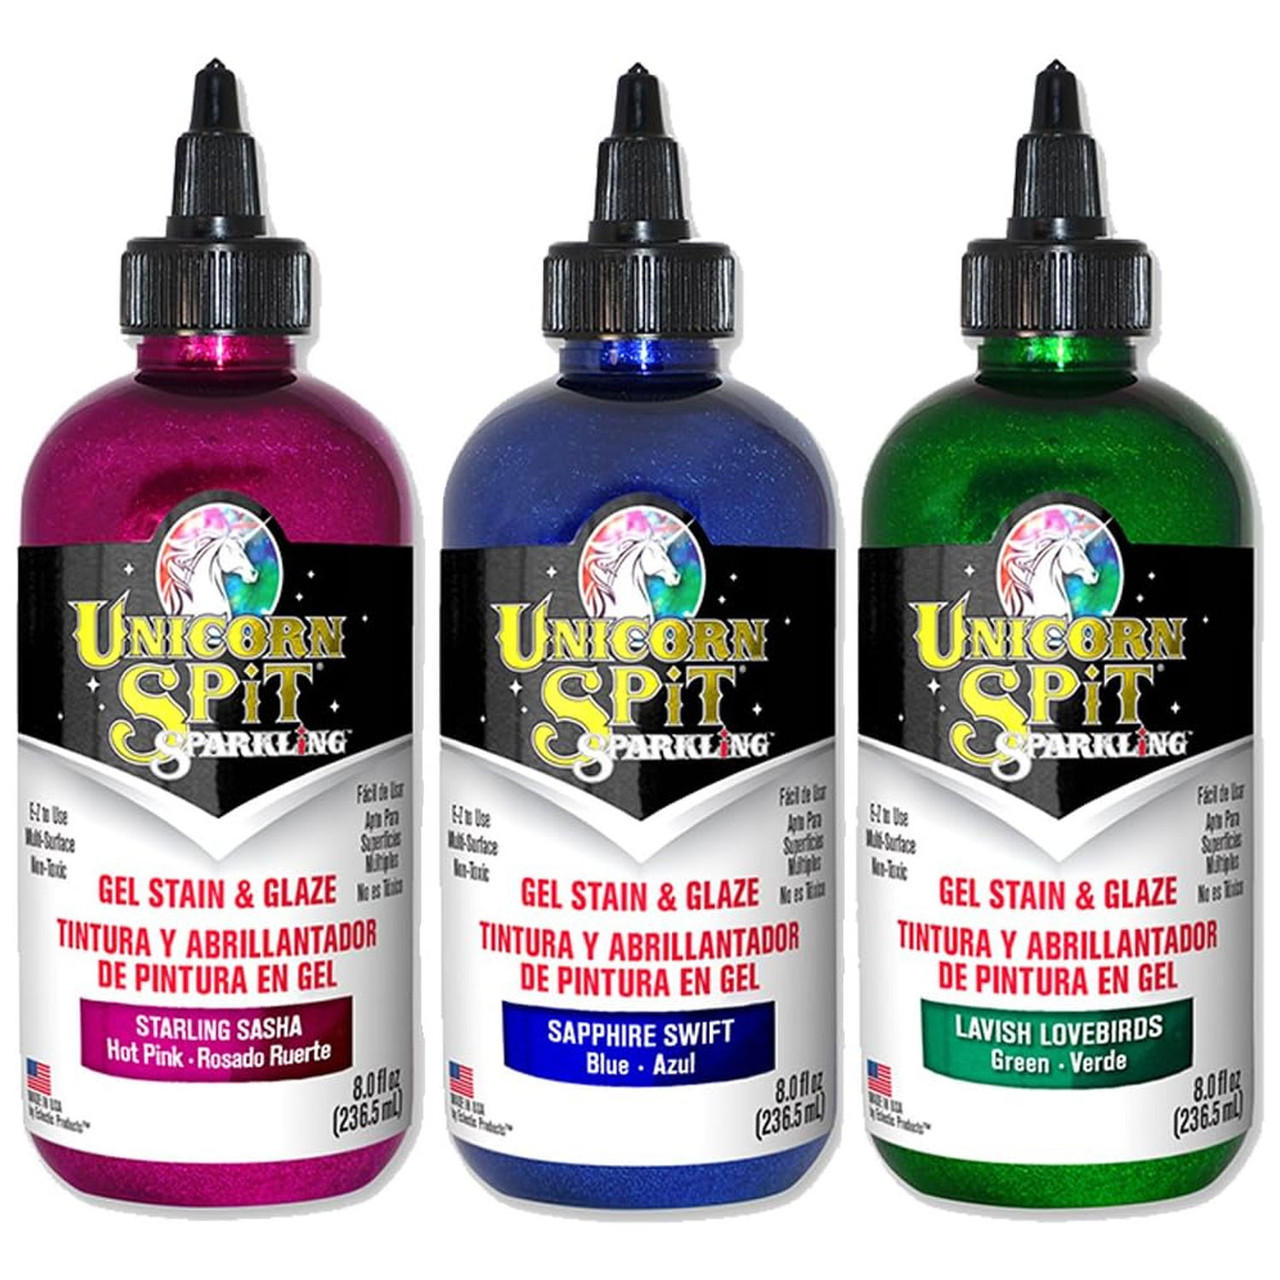 Unicorn SPiT Gel Stain and Glaze 20 Complete Collection: Sparkling and  Original Colors with 10 TreBBies Fine Detail Sticks, 4 oz and 8 oz (Navajo